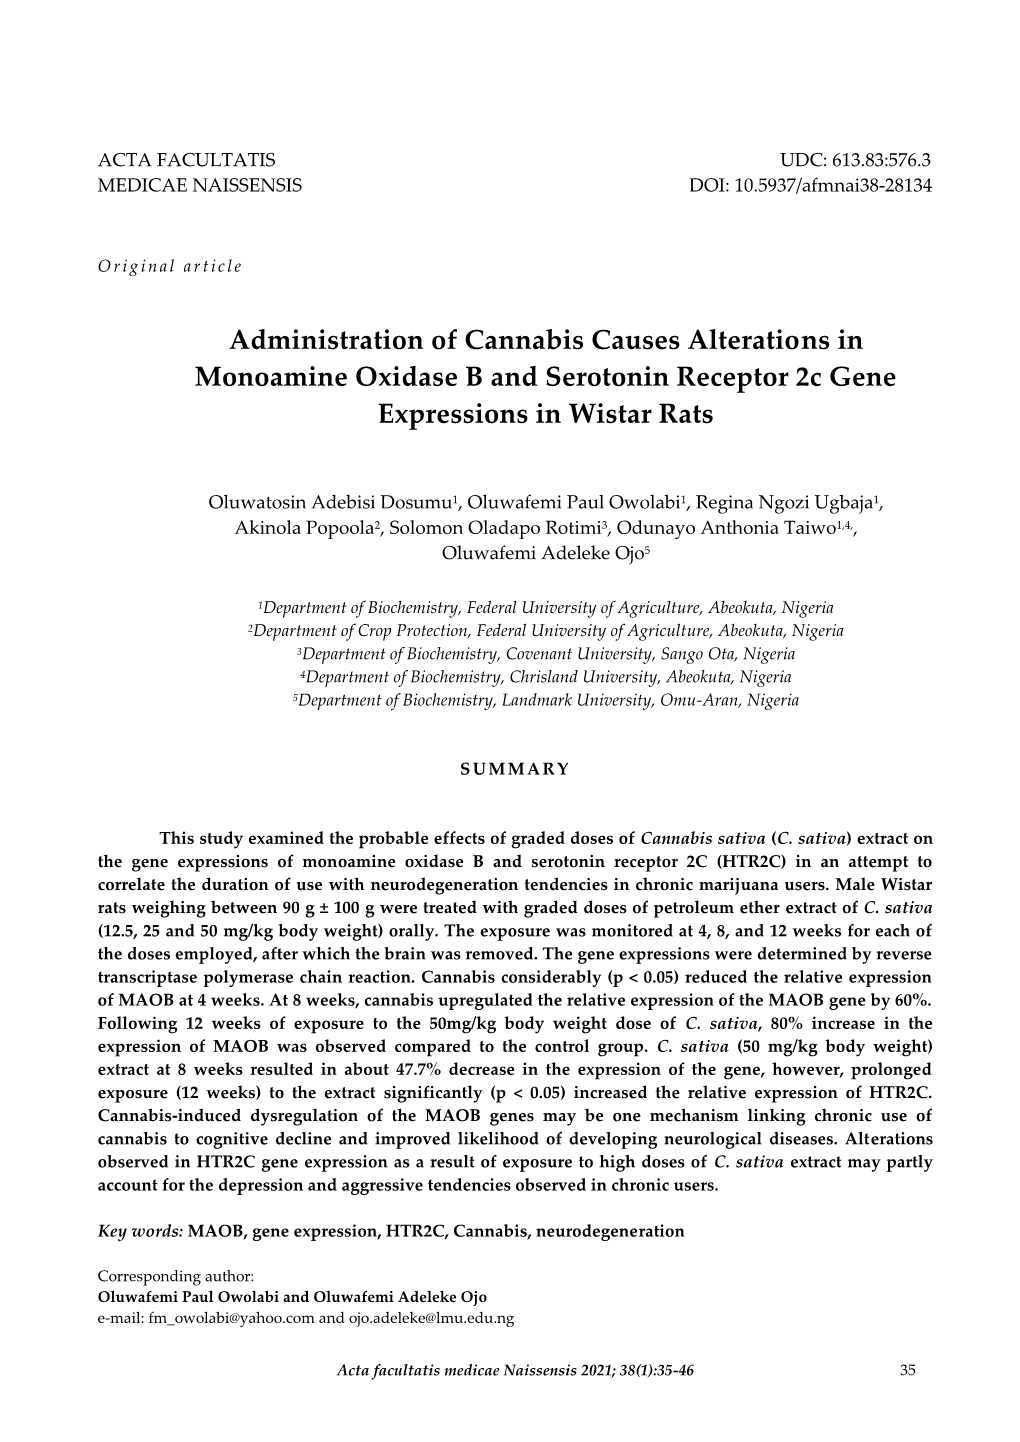 Administration of Cannabis Causes Alterations in Monoamine Oxidase B and Serotonin Receptor 2C Gene Expressions in Wistar Rats